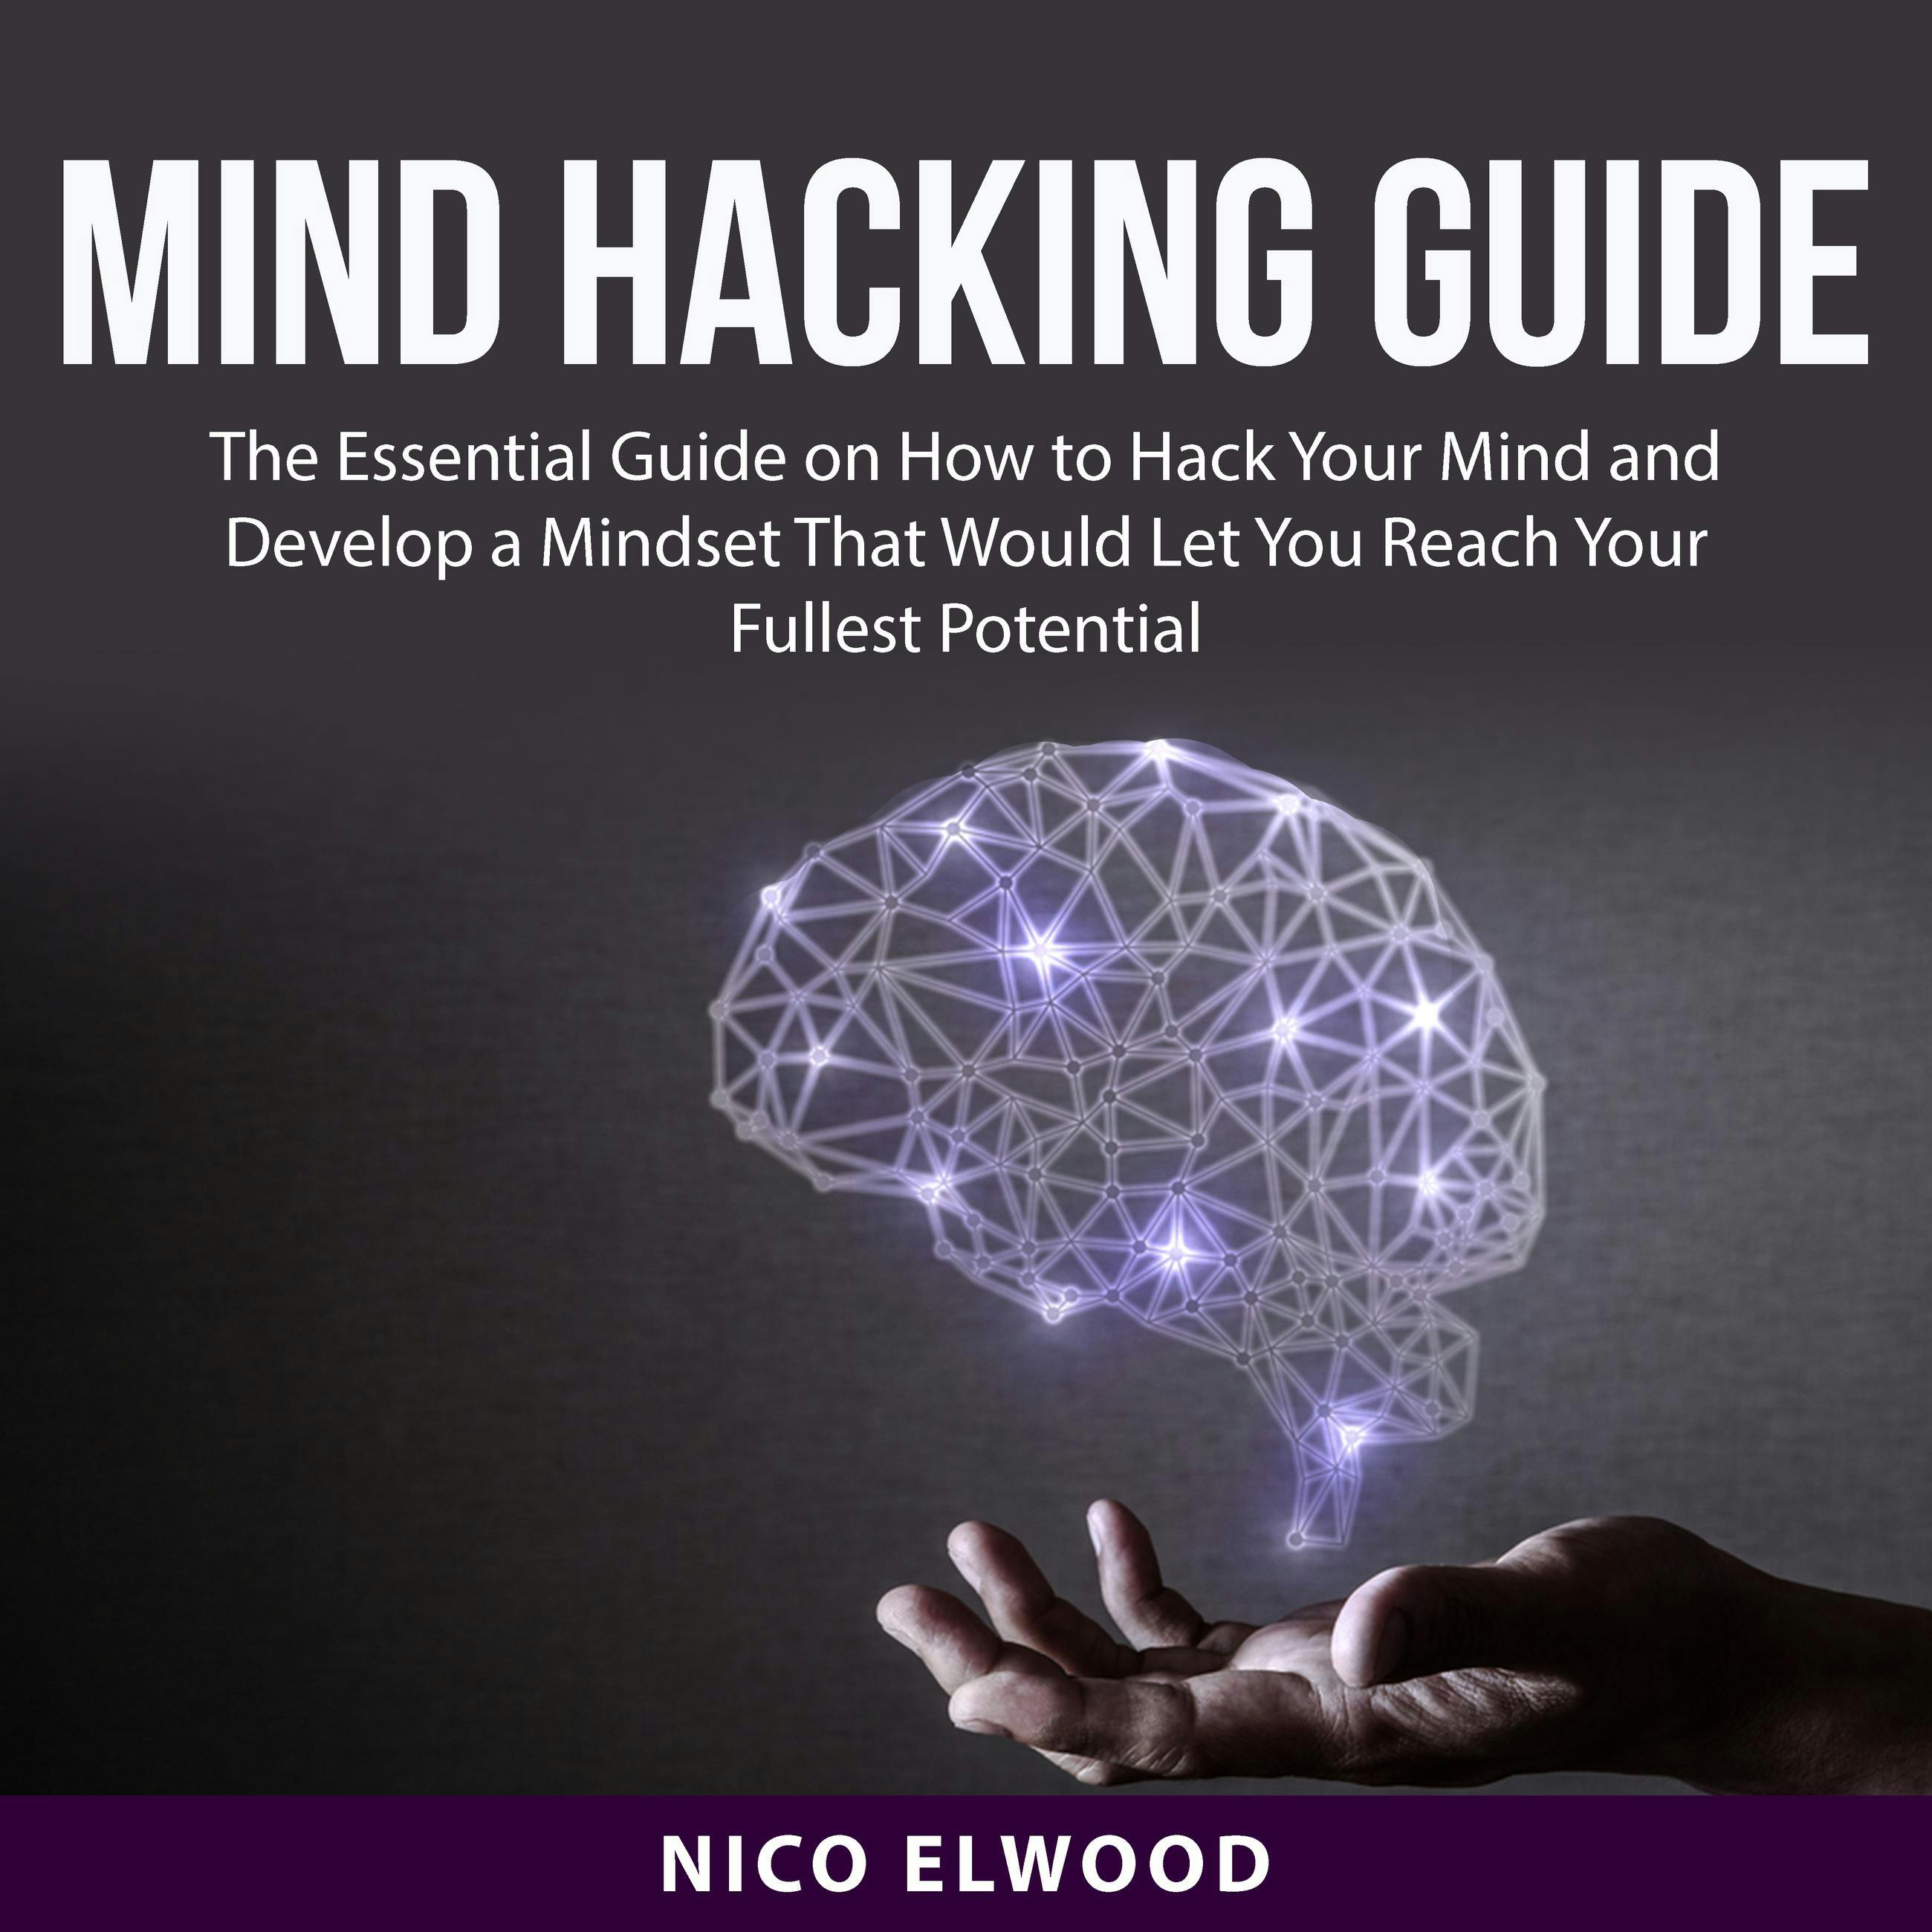 Mind Hacking Guide: The Essential Guide on How to Hack Your Mind and Develop a Mindset That Would Let You Reach Your Fullest Potential - undefined